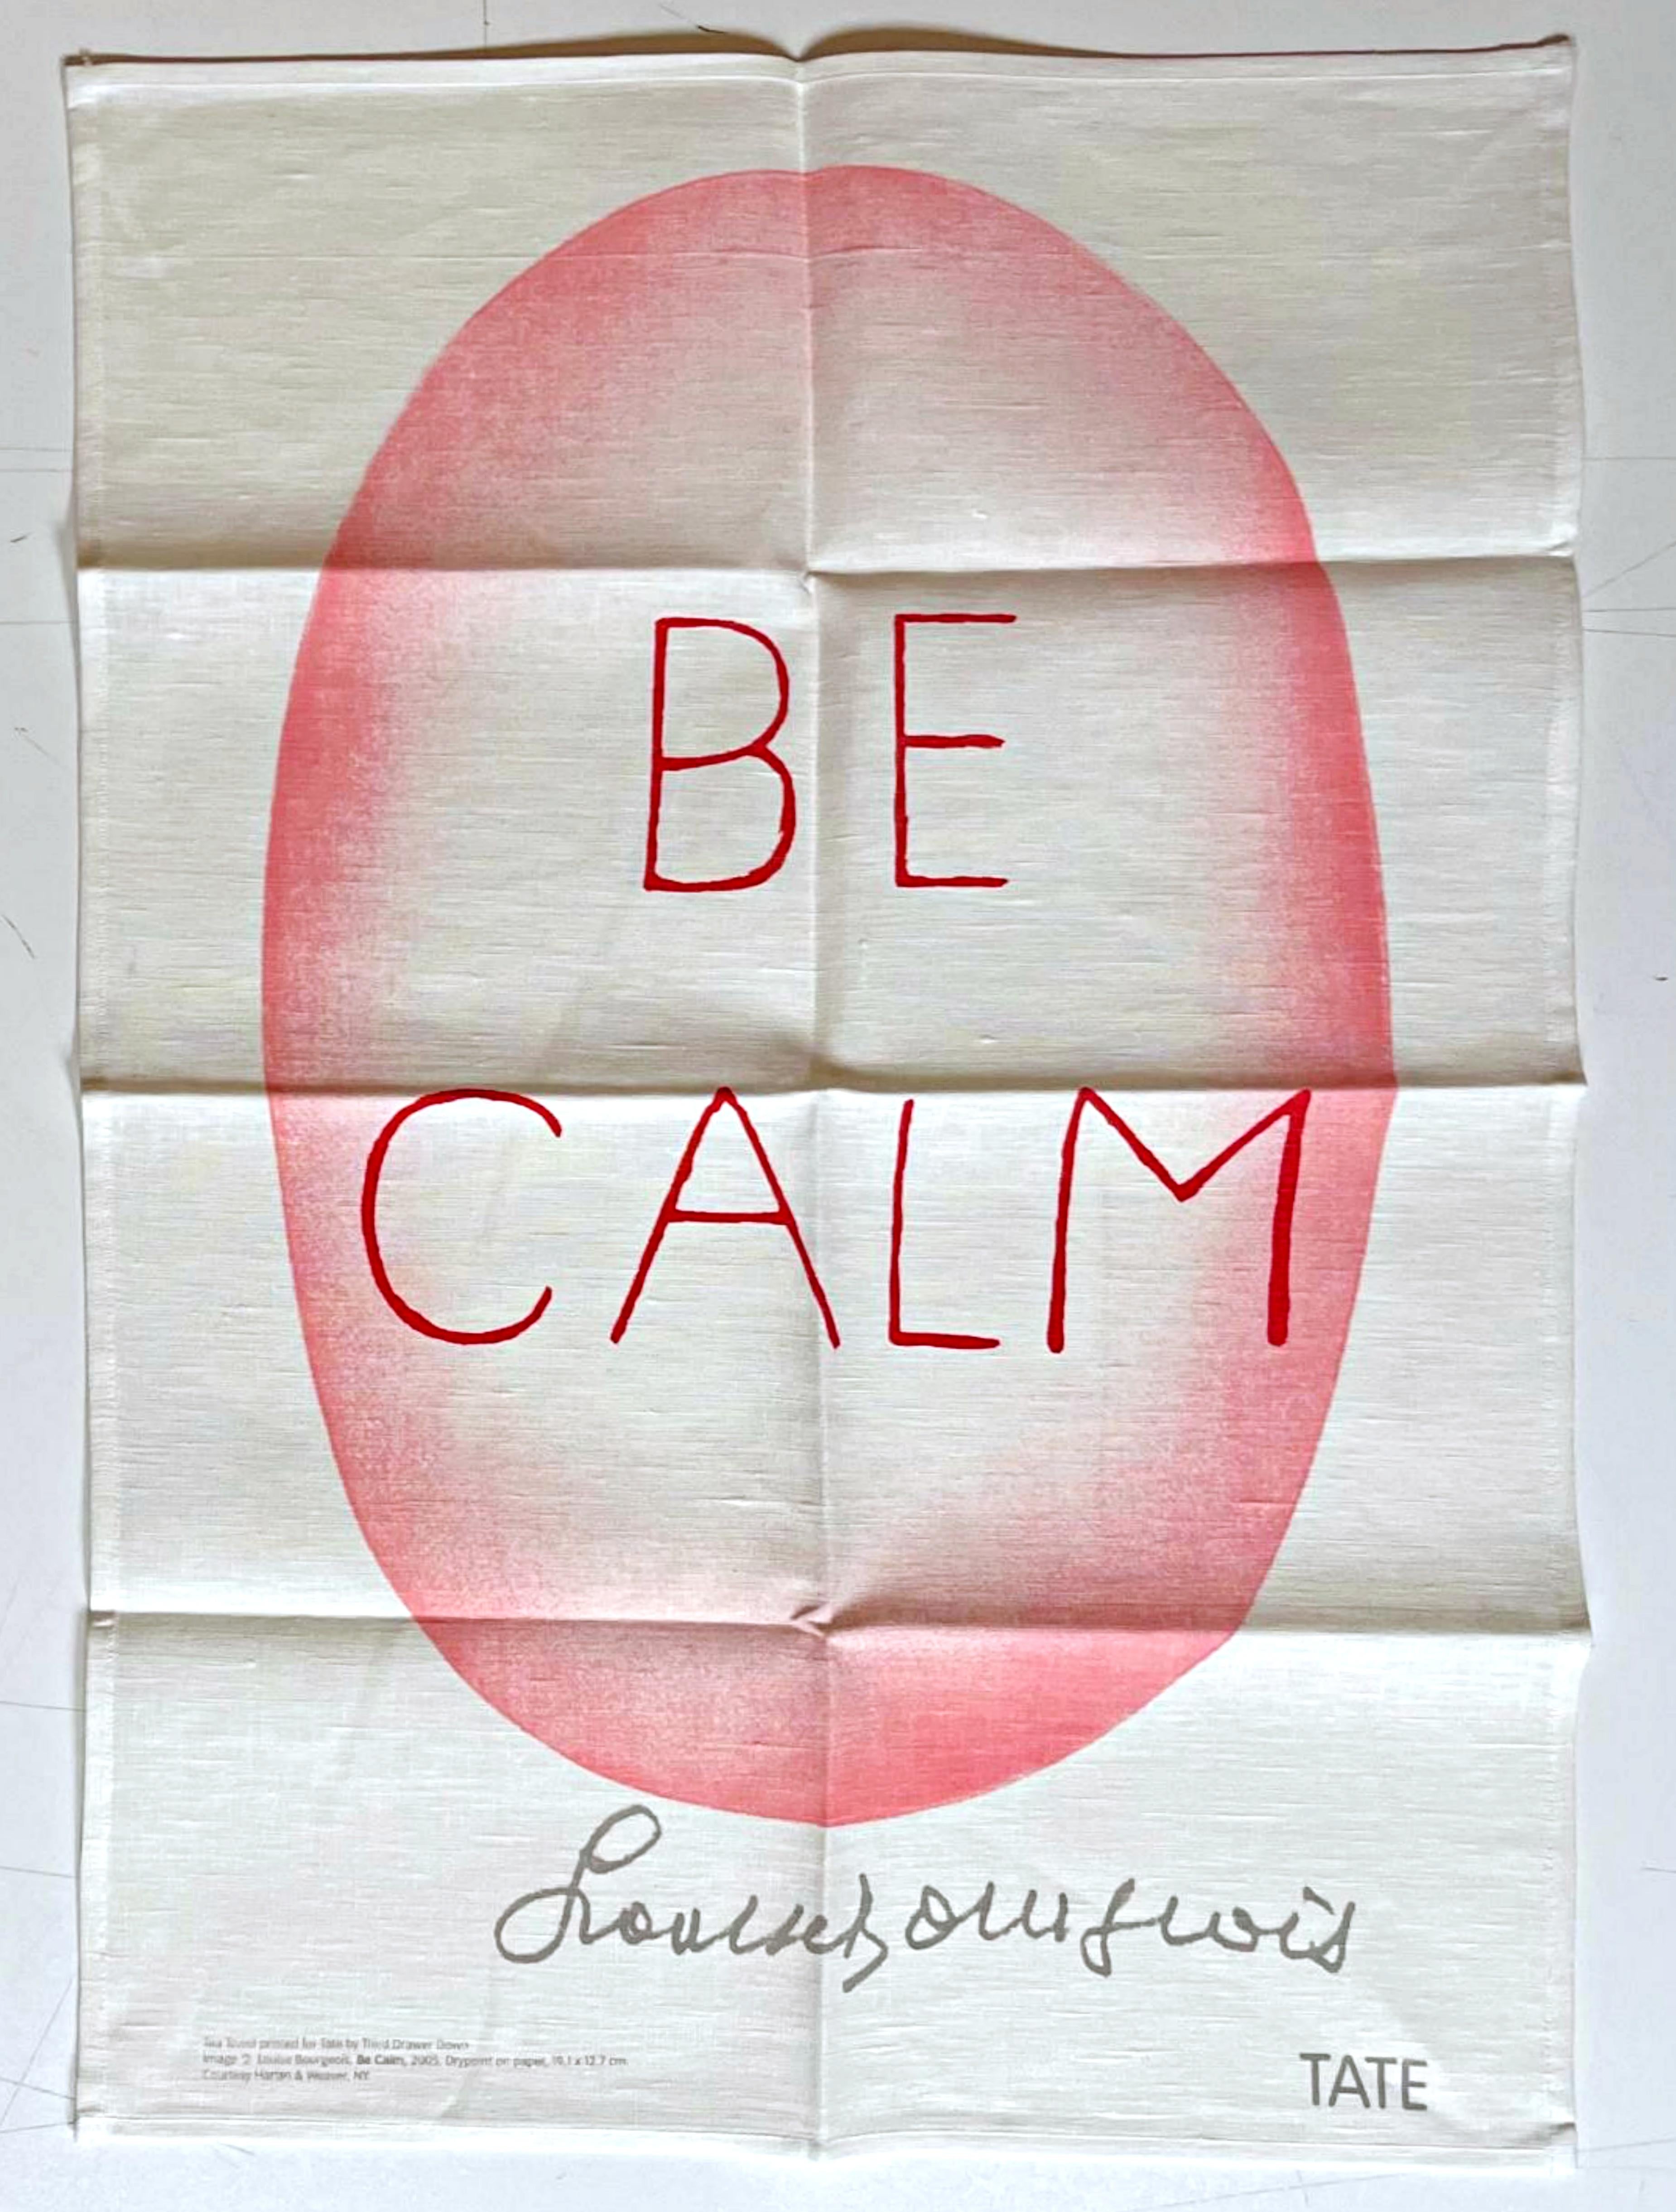 Be Calm - Print by Louise Bourgeois